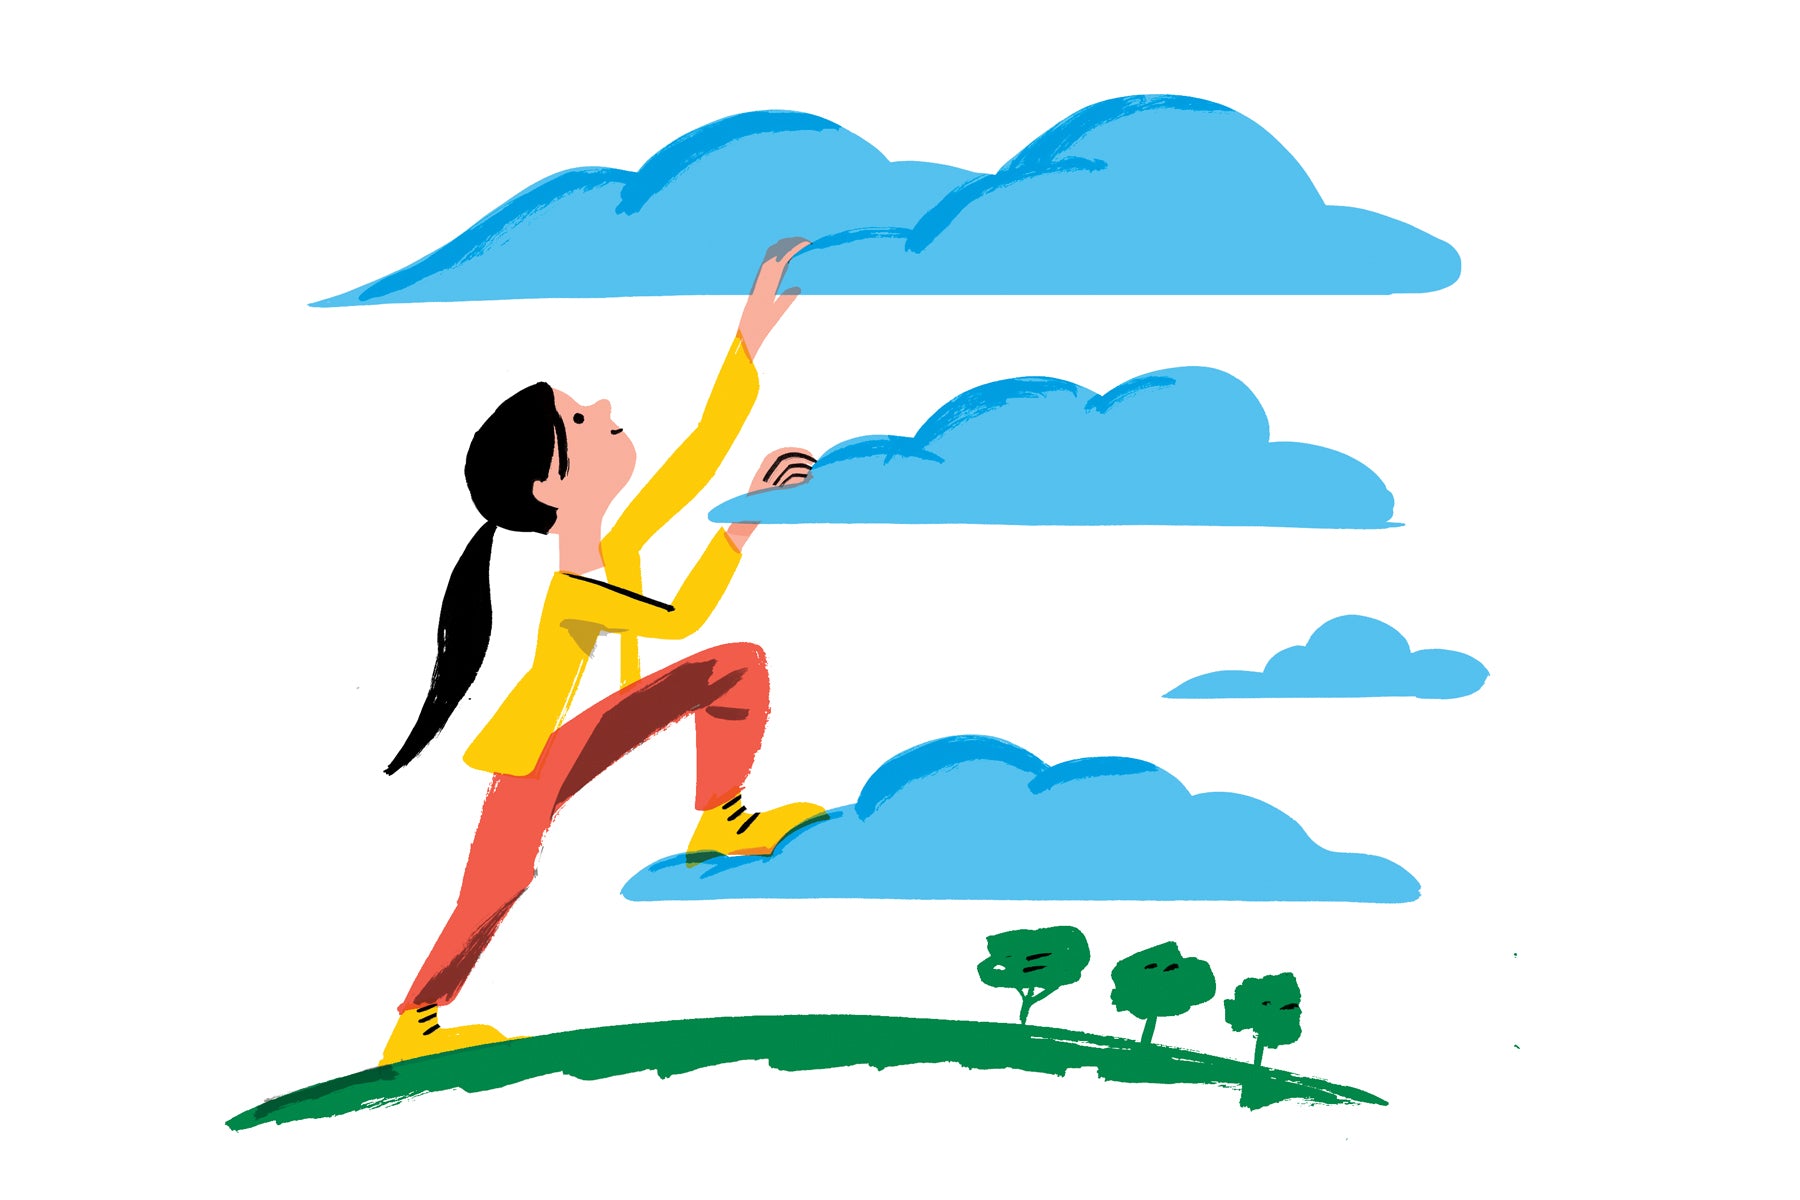 Illustration of a young girl with brown hair and a yellow shirt on with clouds above her. The clouds are staggered and she is climbing them like steps to convey the idea that she is reaching for her goals.